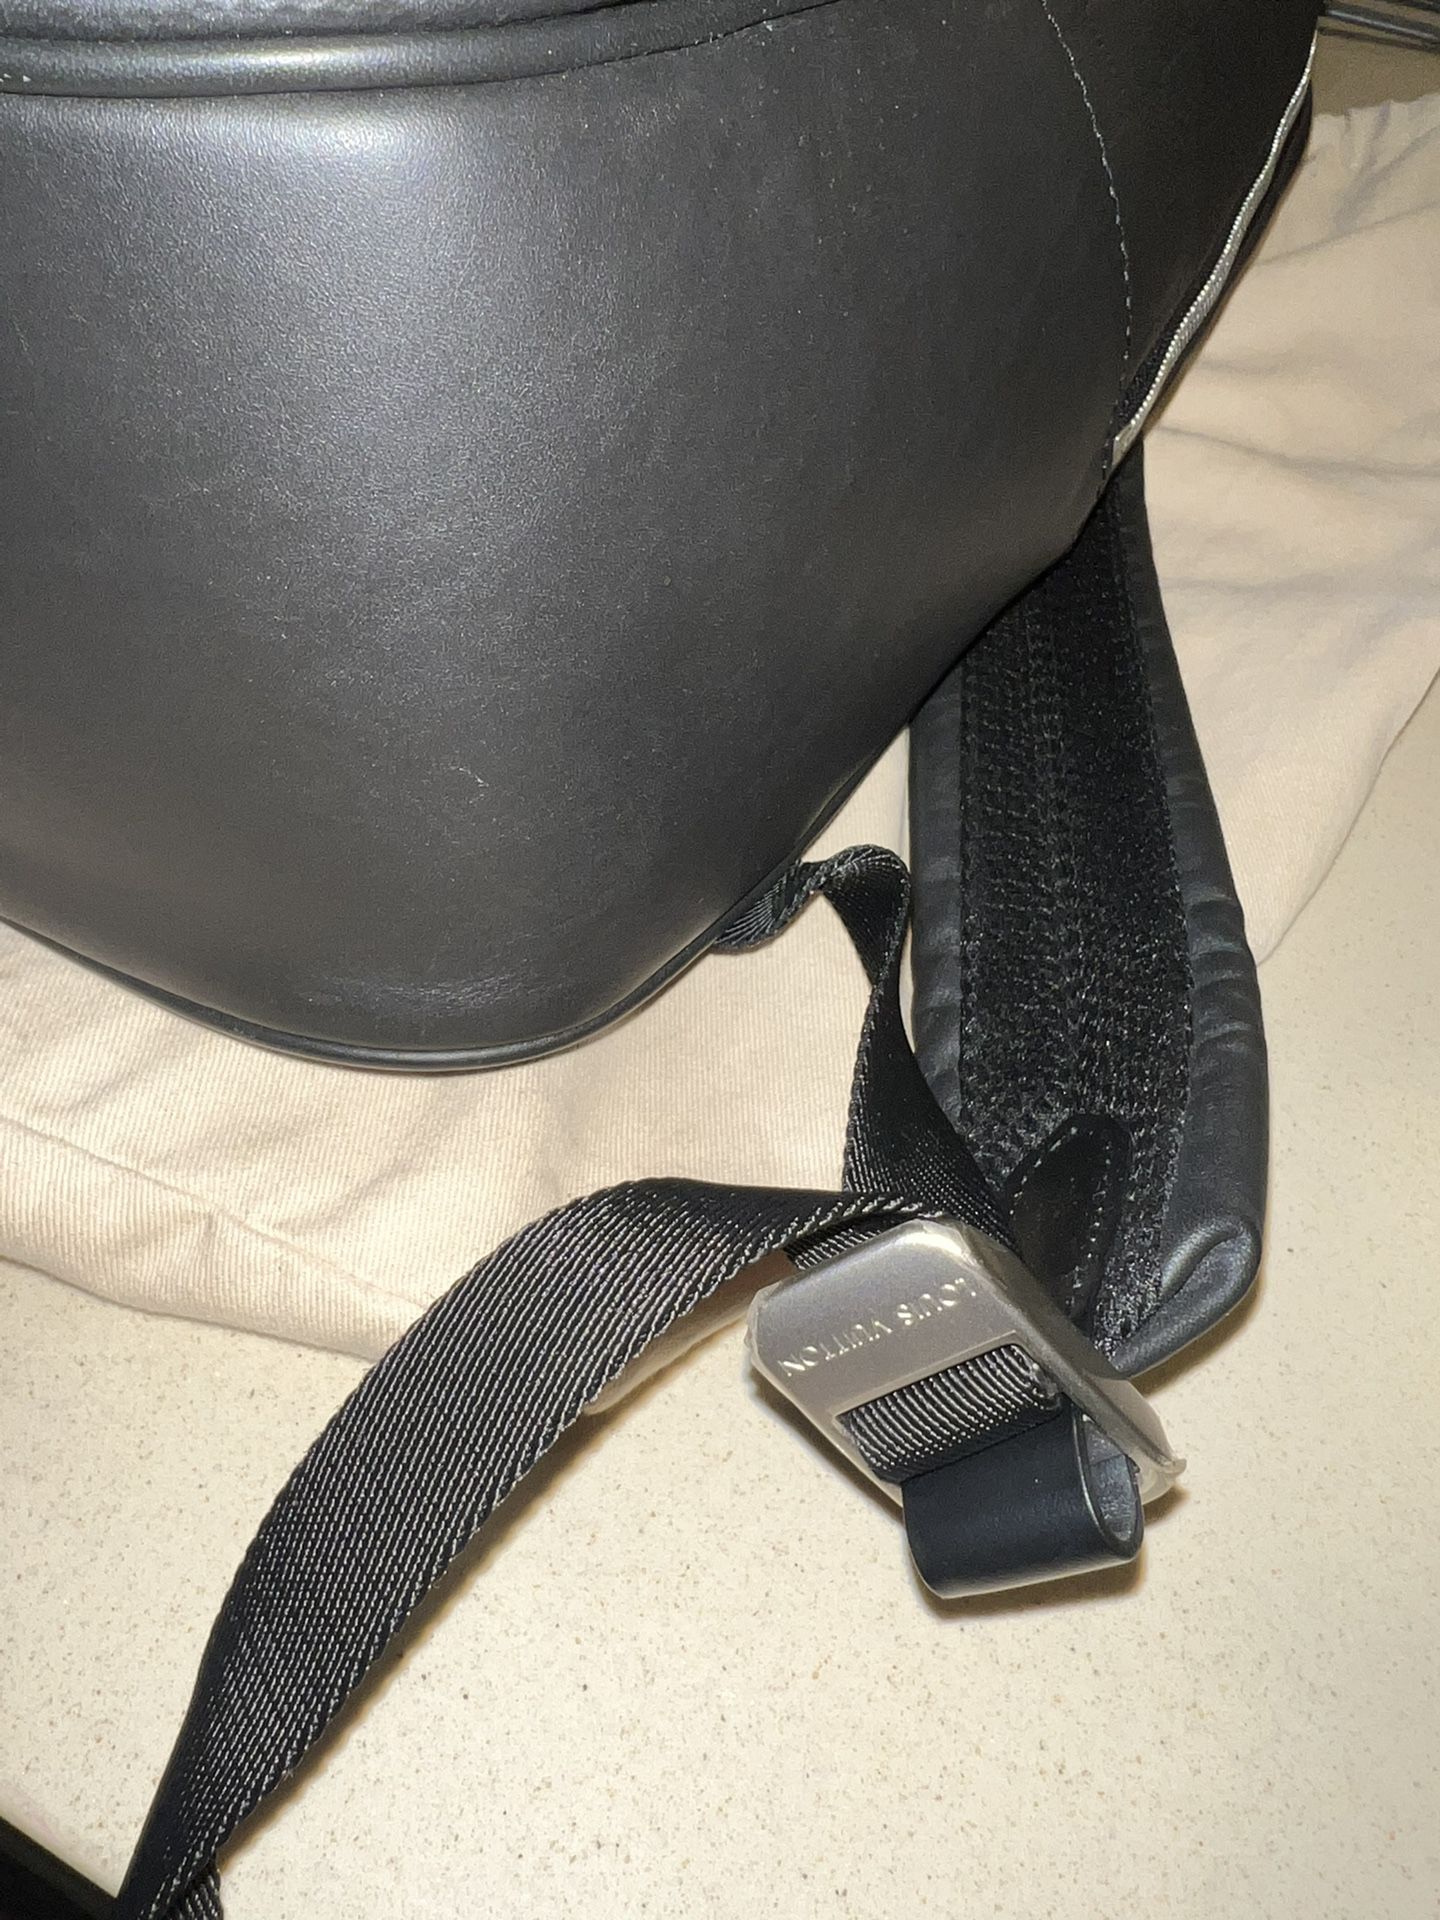 LV Louis Vuitton Ellipse Backpack Turtle Shell Handbag Sac Monogram Book  Bag Travel Purse Looks New (unauthentic) for Sale in Miami, FL - OfferUp